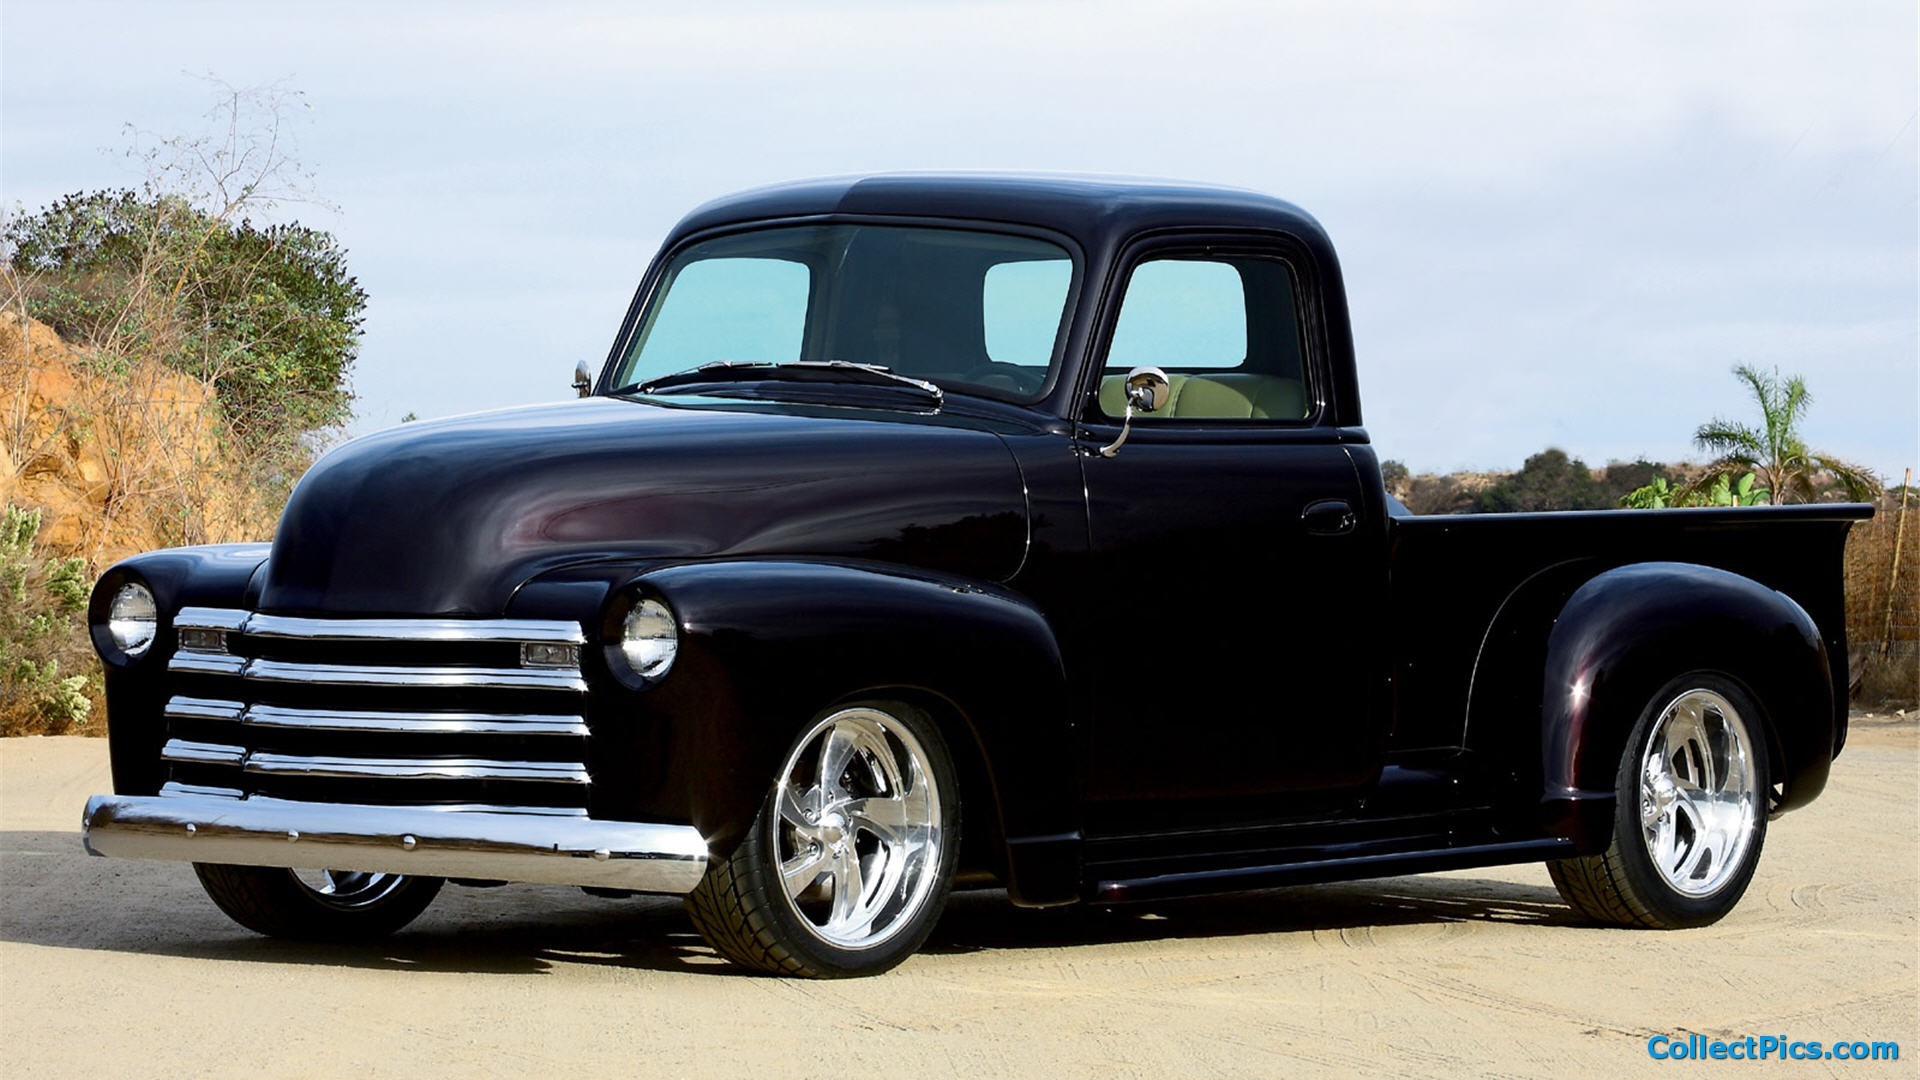 Chevy Truck Wallpapers, Creative Chevy Truck Wallpapers – #WP